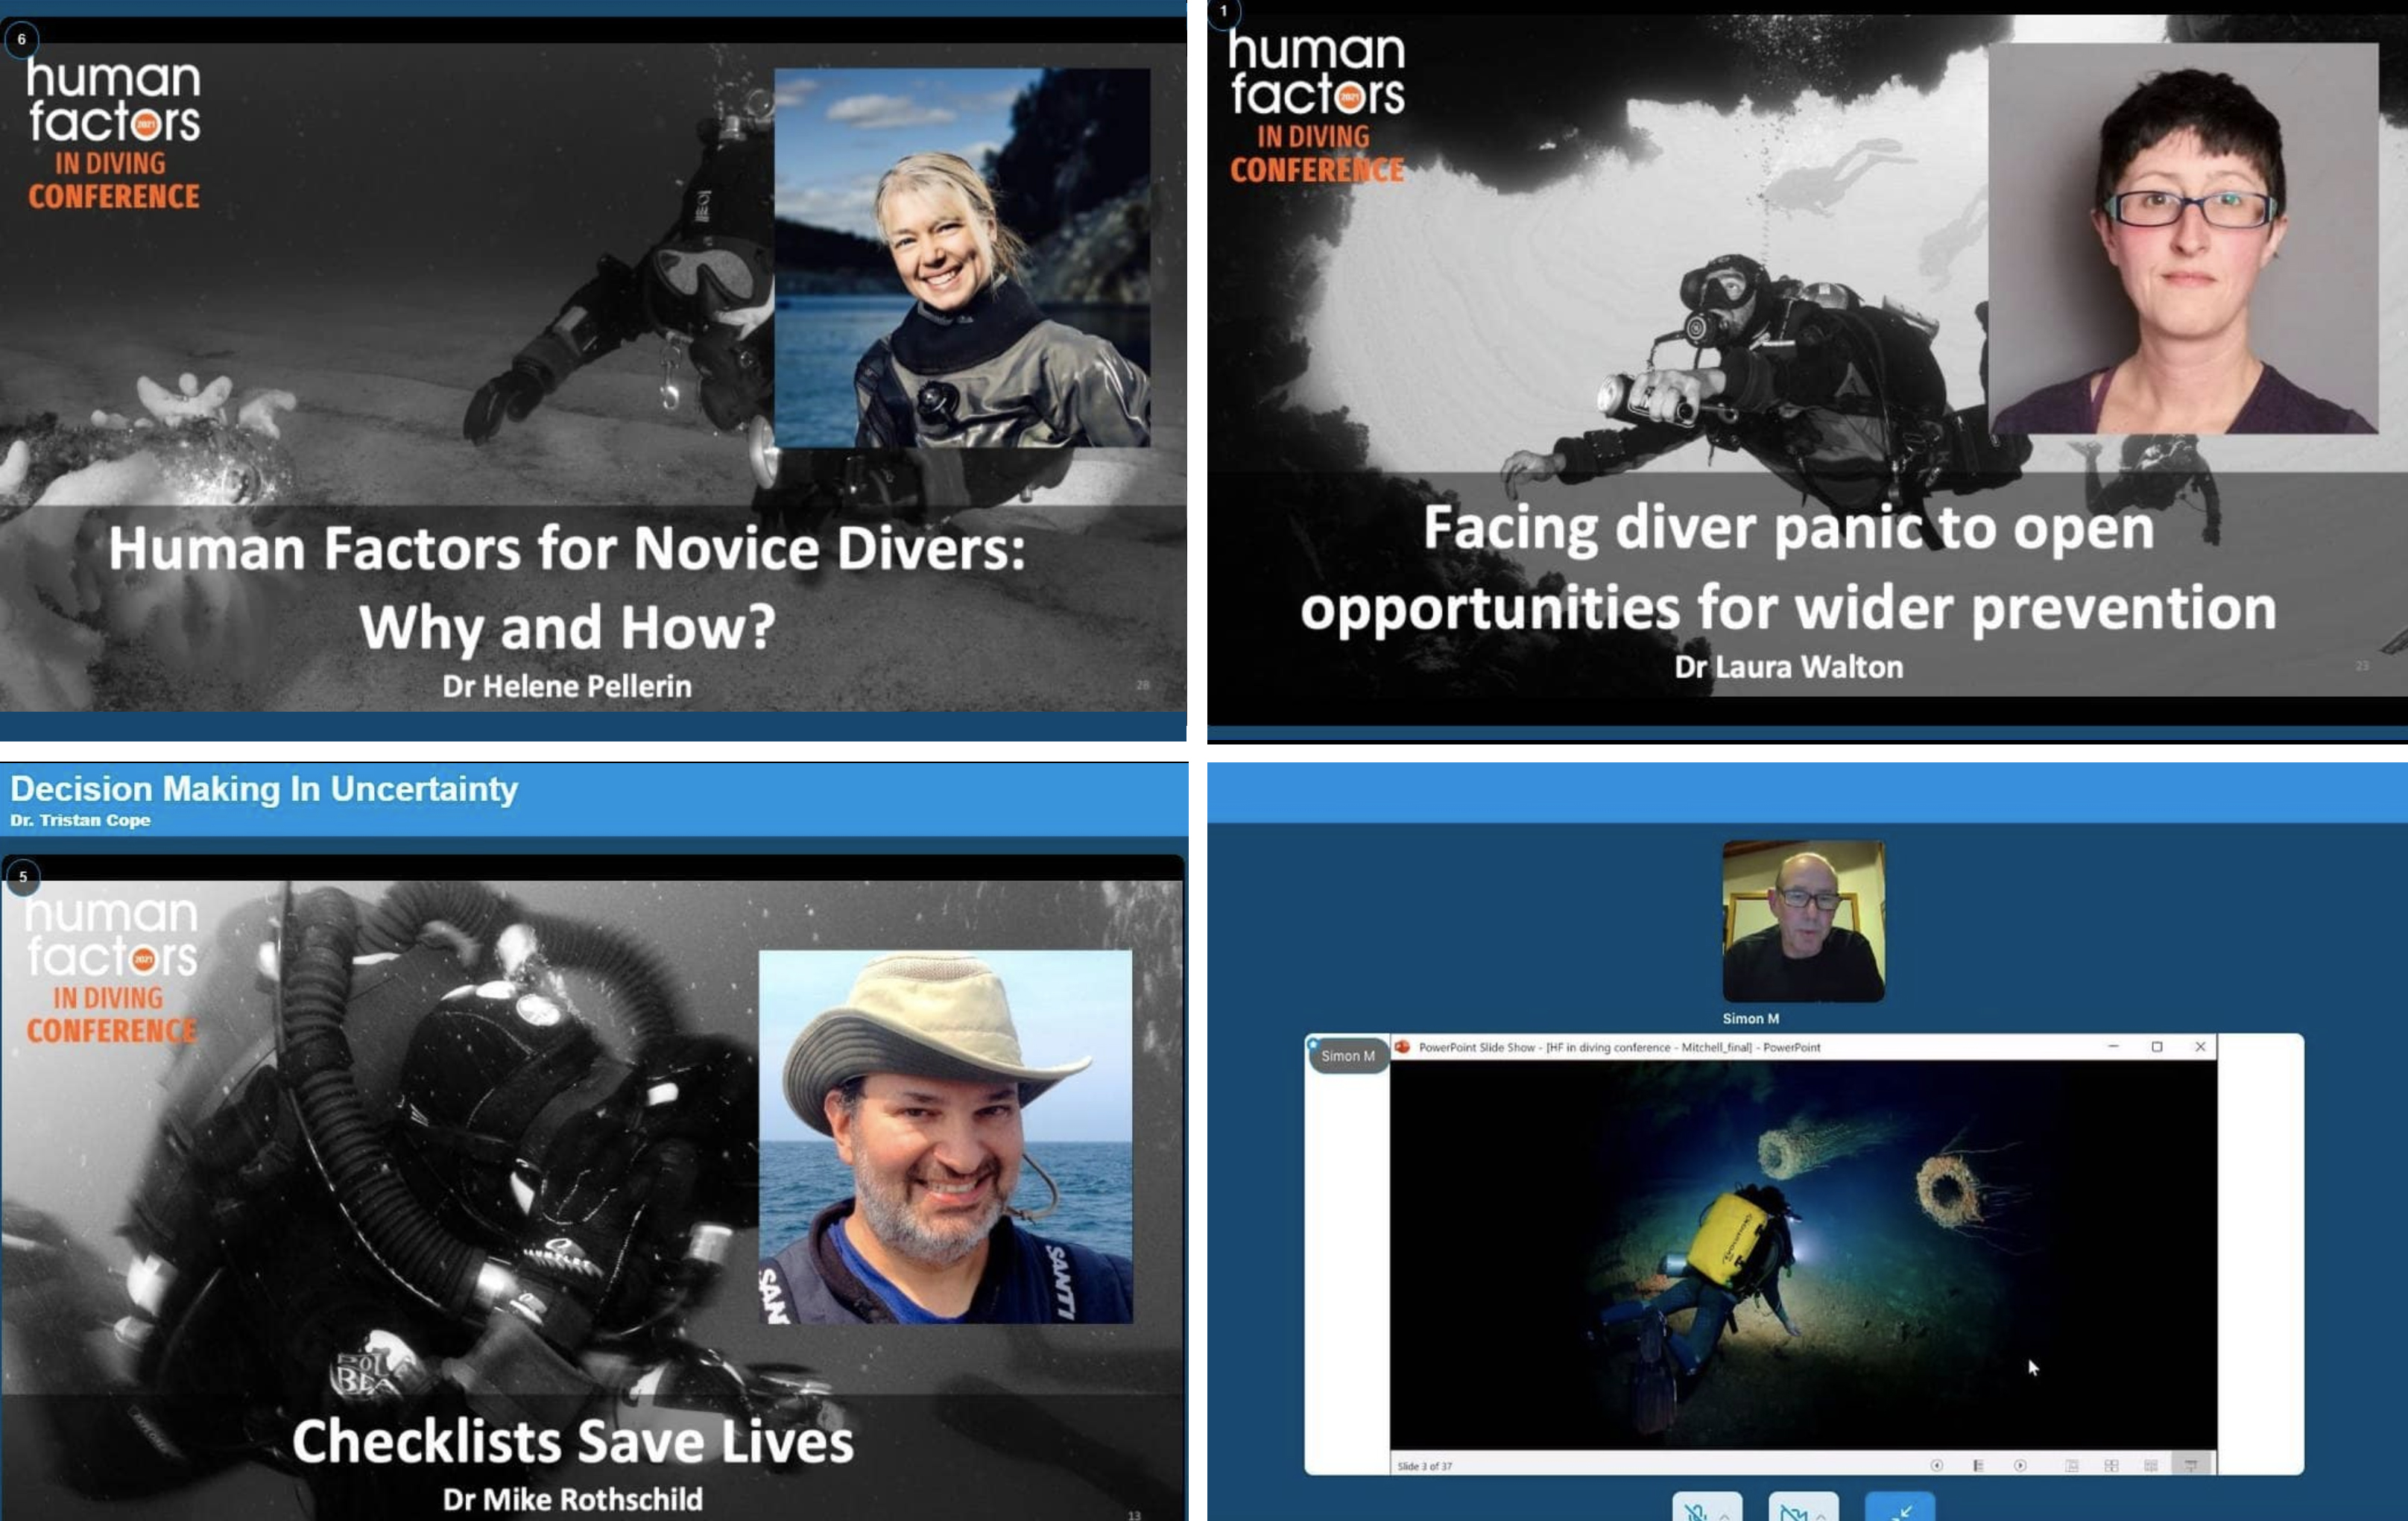 Speakers at the Human Factors in Diving Conference